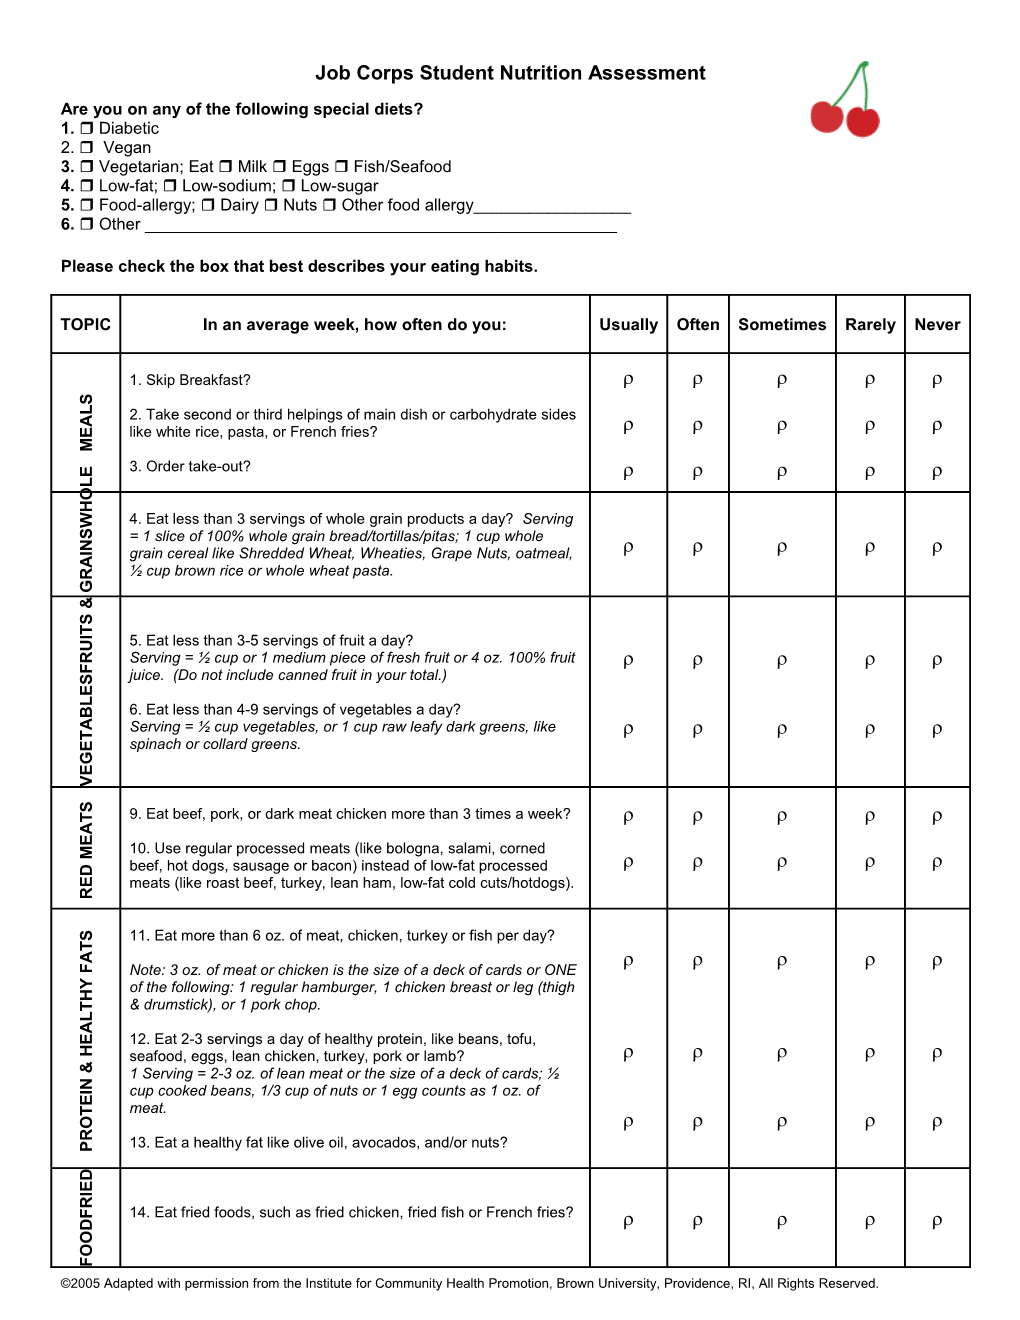 Job Corps Student Nutrition Assessment